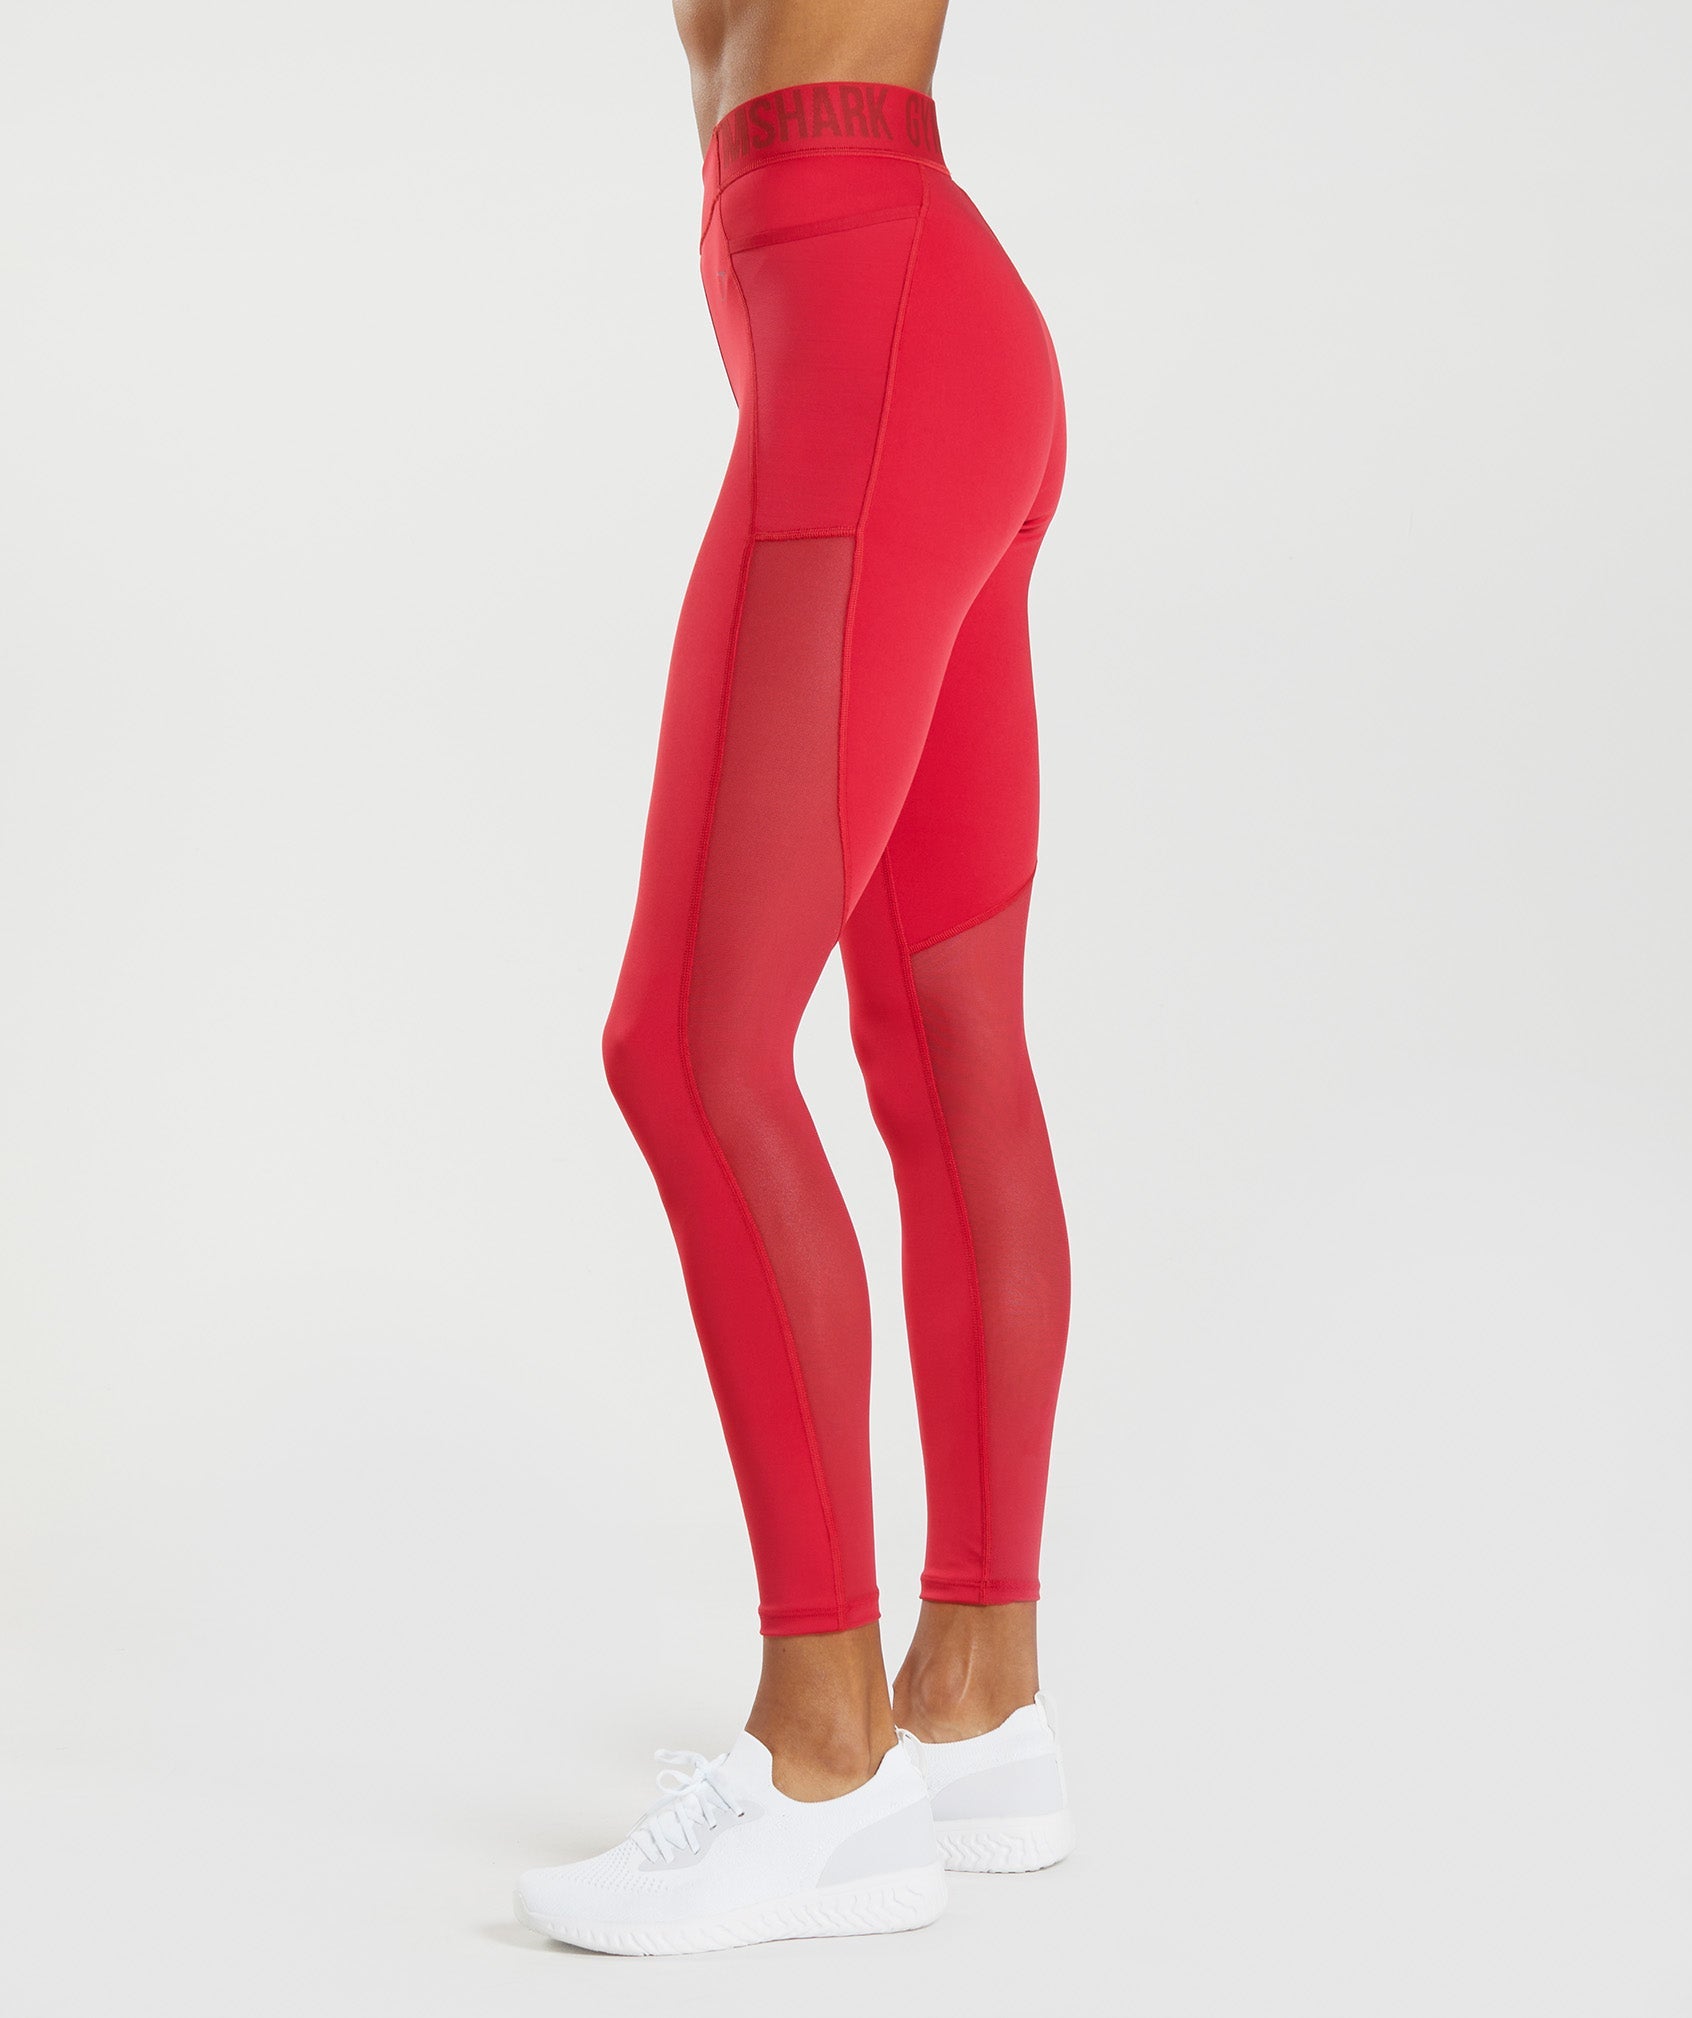 Red Workout sets – Red gym sets from Gymshark